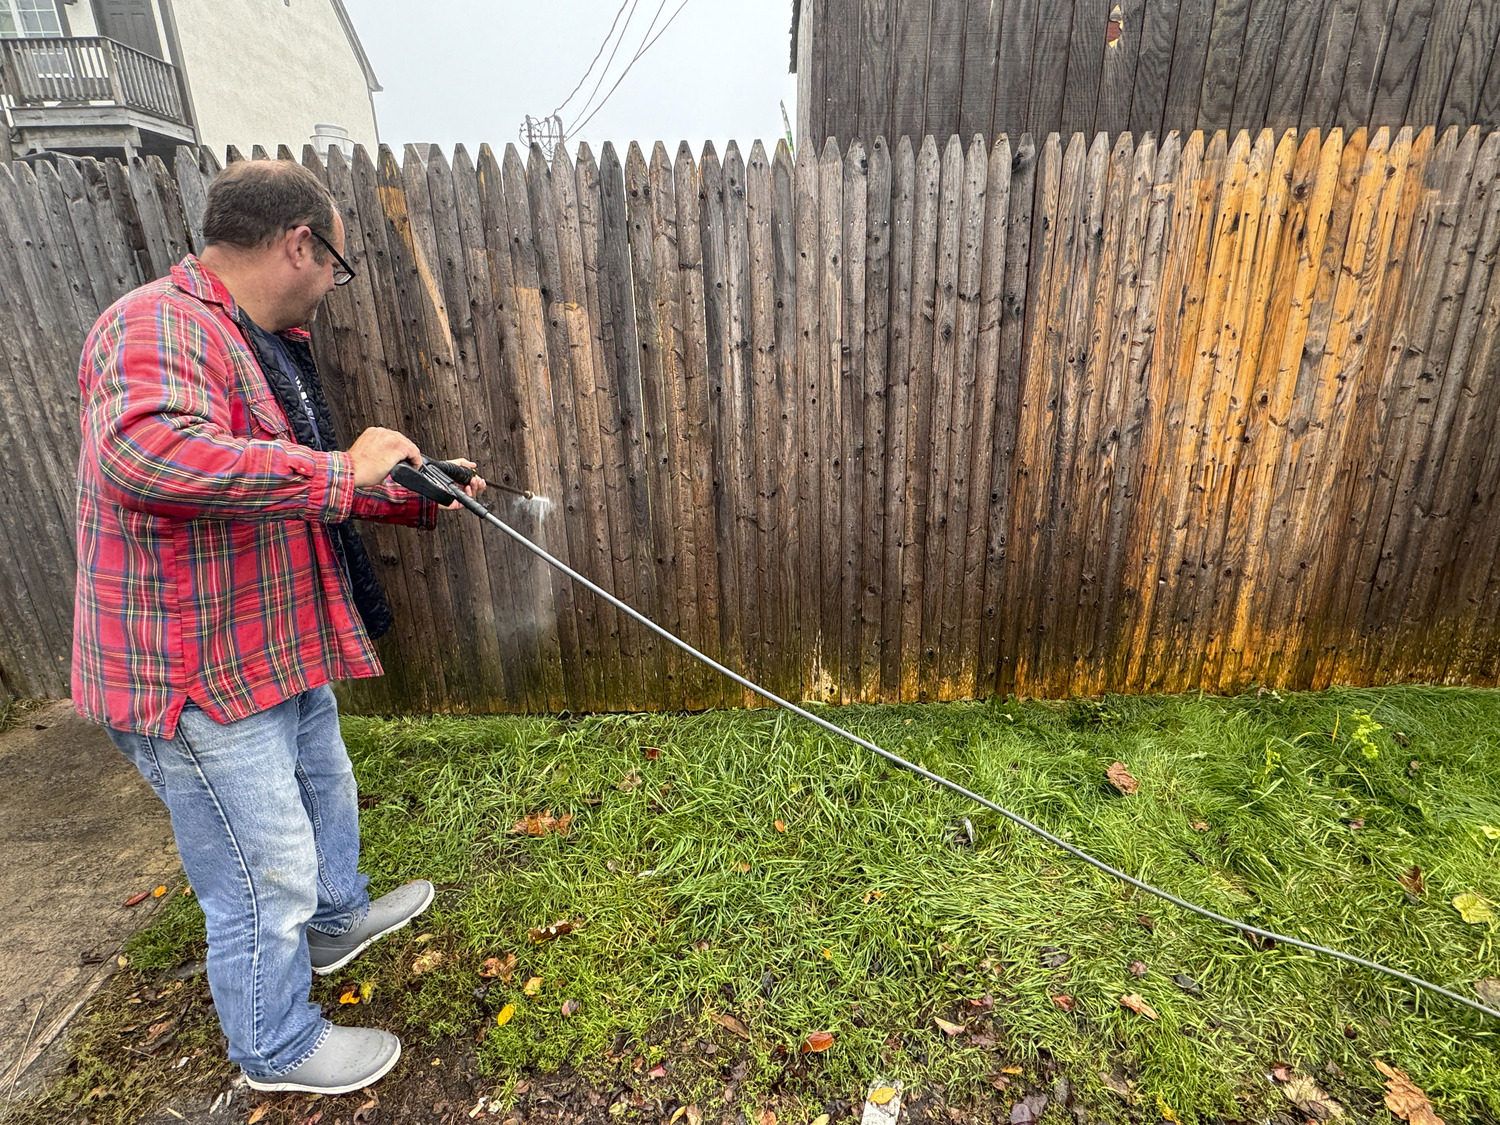 Former FDNY firefighter Morgan Neff power washing the swastikas off the fence at Naturally Good on Monday in Montauk.